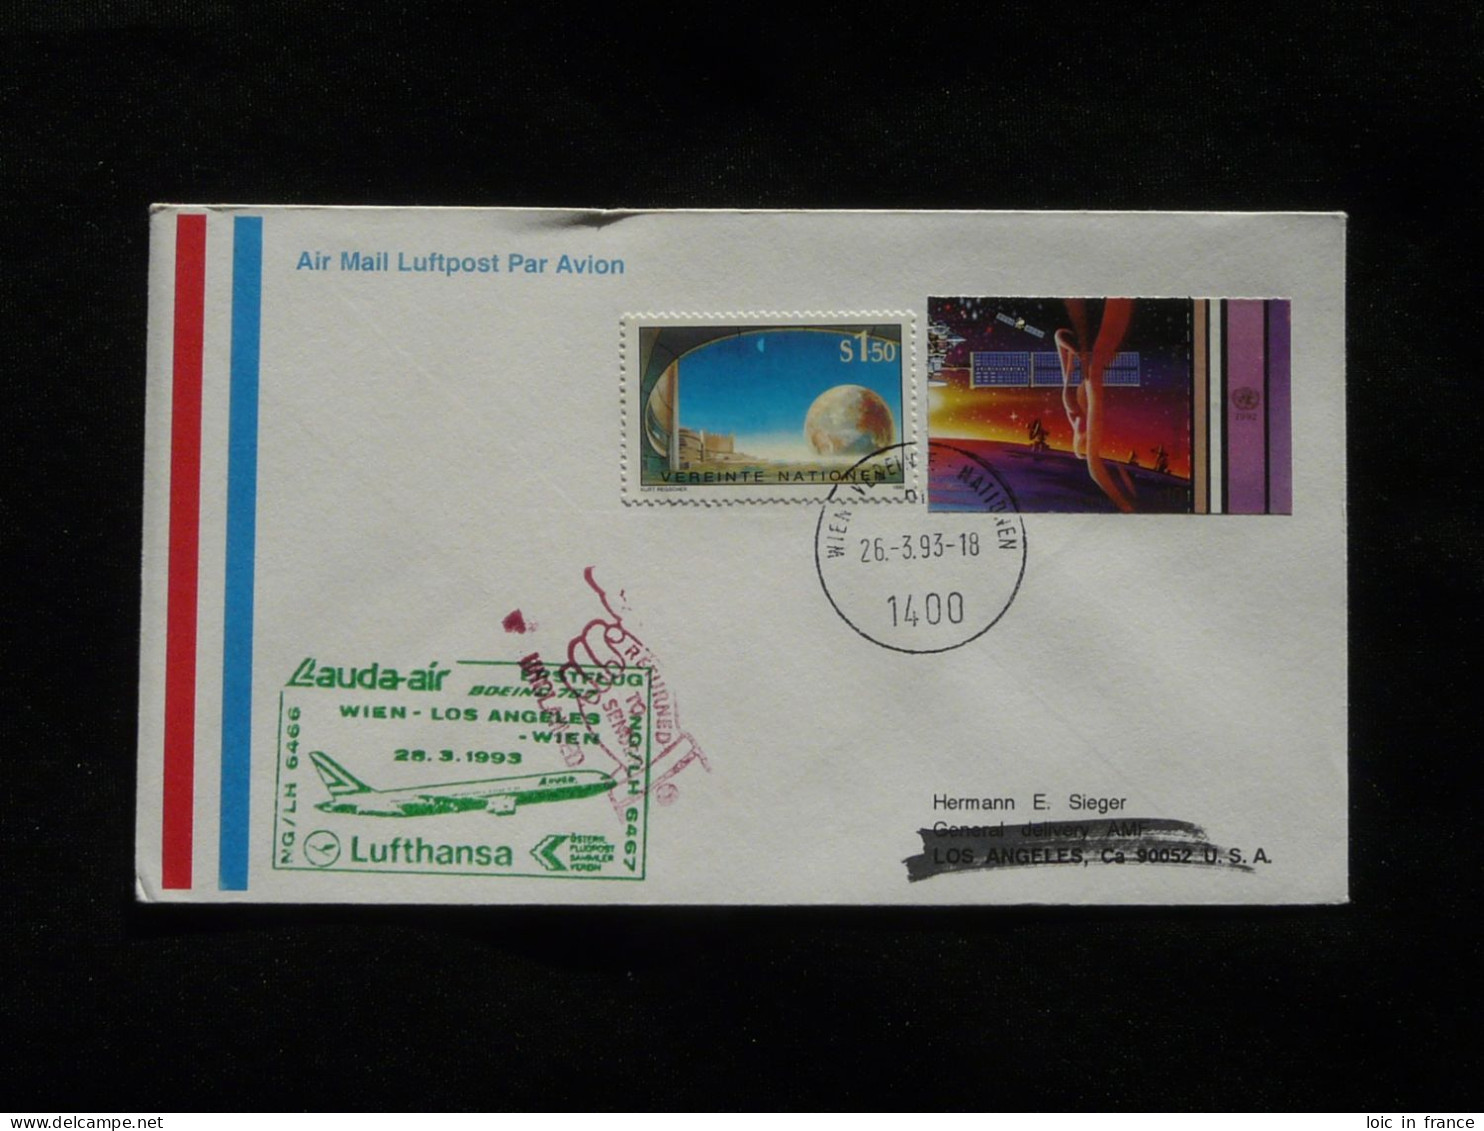 Lettre Premier Vol First Flight Cover Wien United Nations To Los Angeles Lauda Air Lufthansa 1993 - Covers & Documents